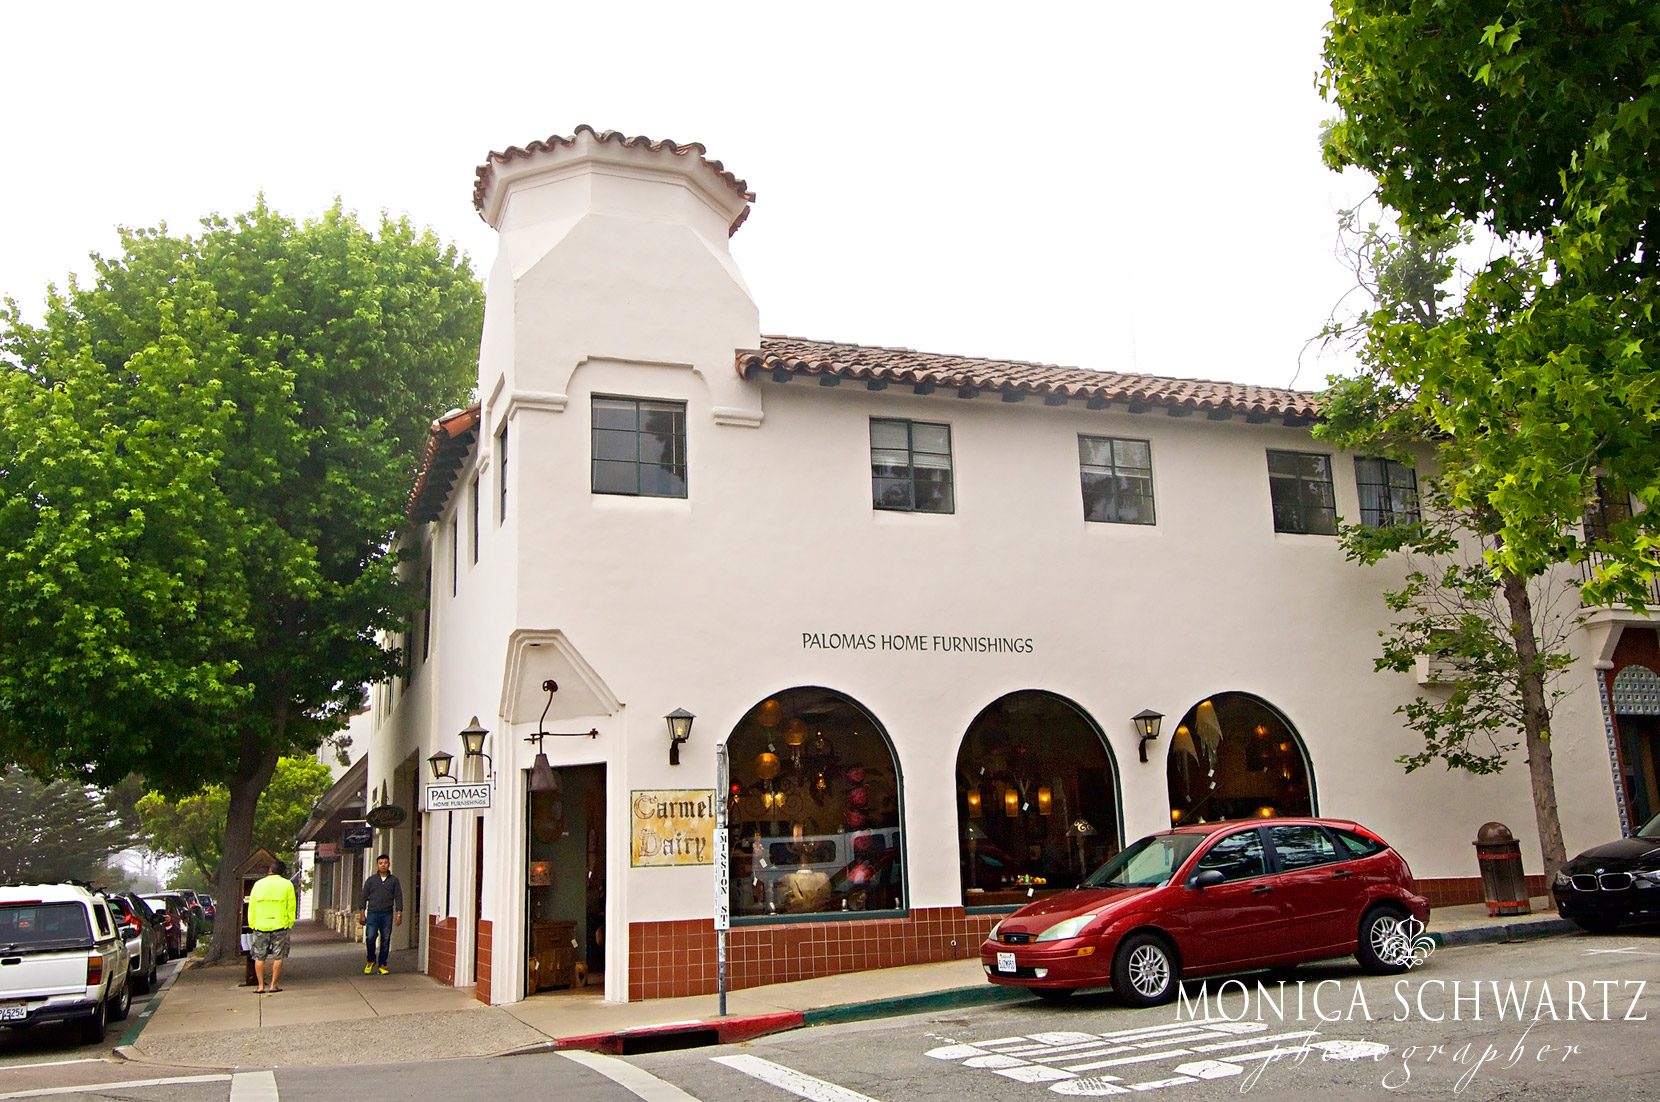 Paloma-Home-Furnishings-building-Ocean-Avenue-at-Mission-in-Carmel-by-the-Sea-California